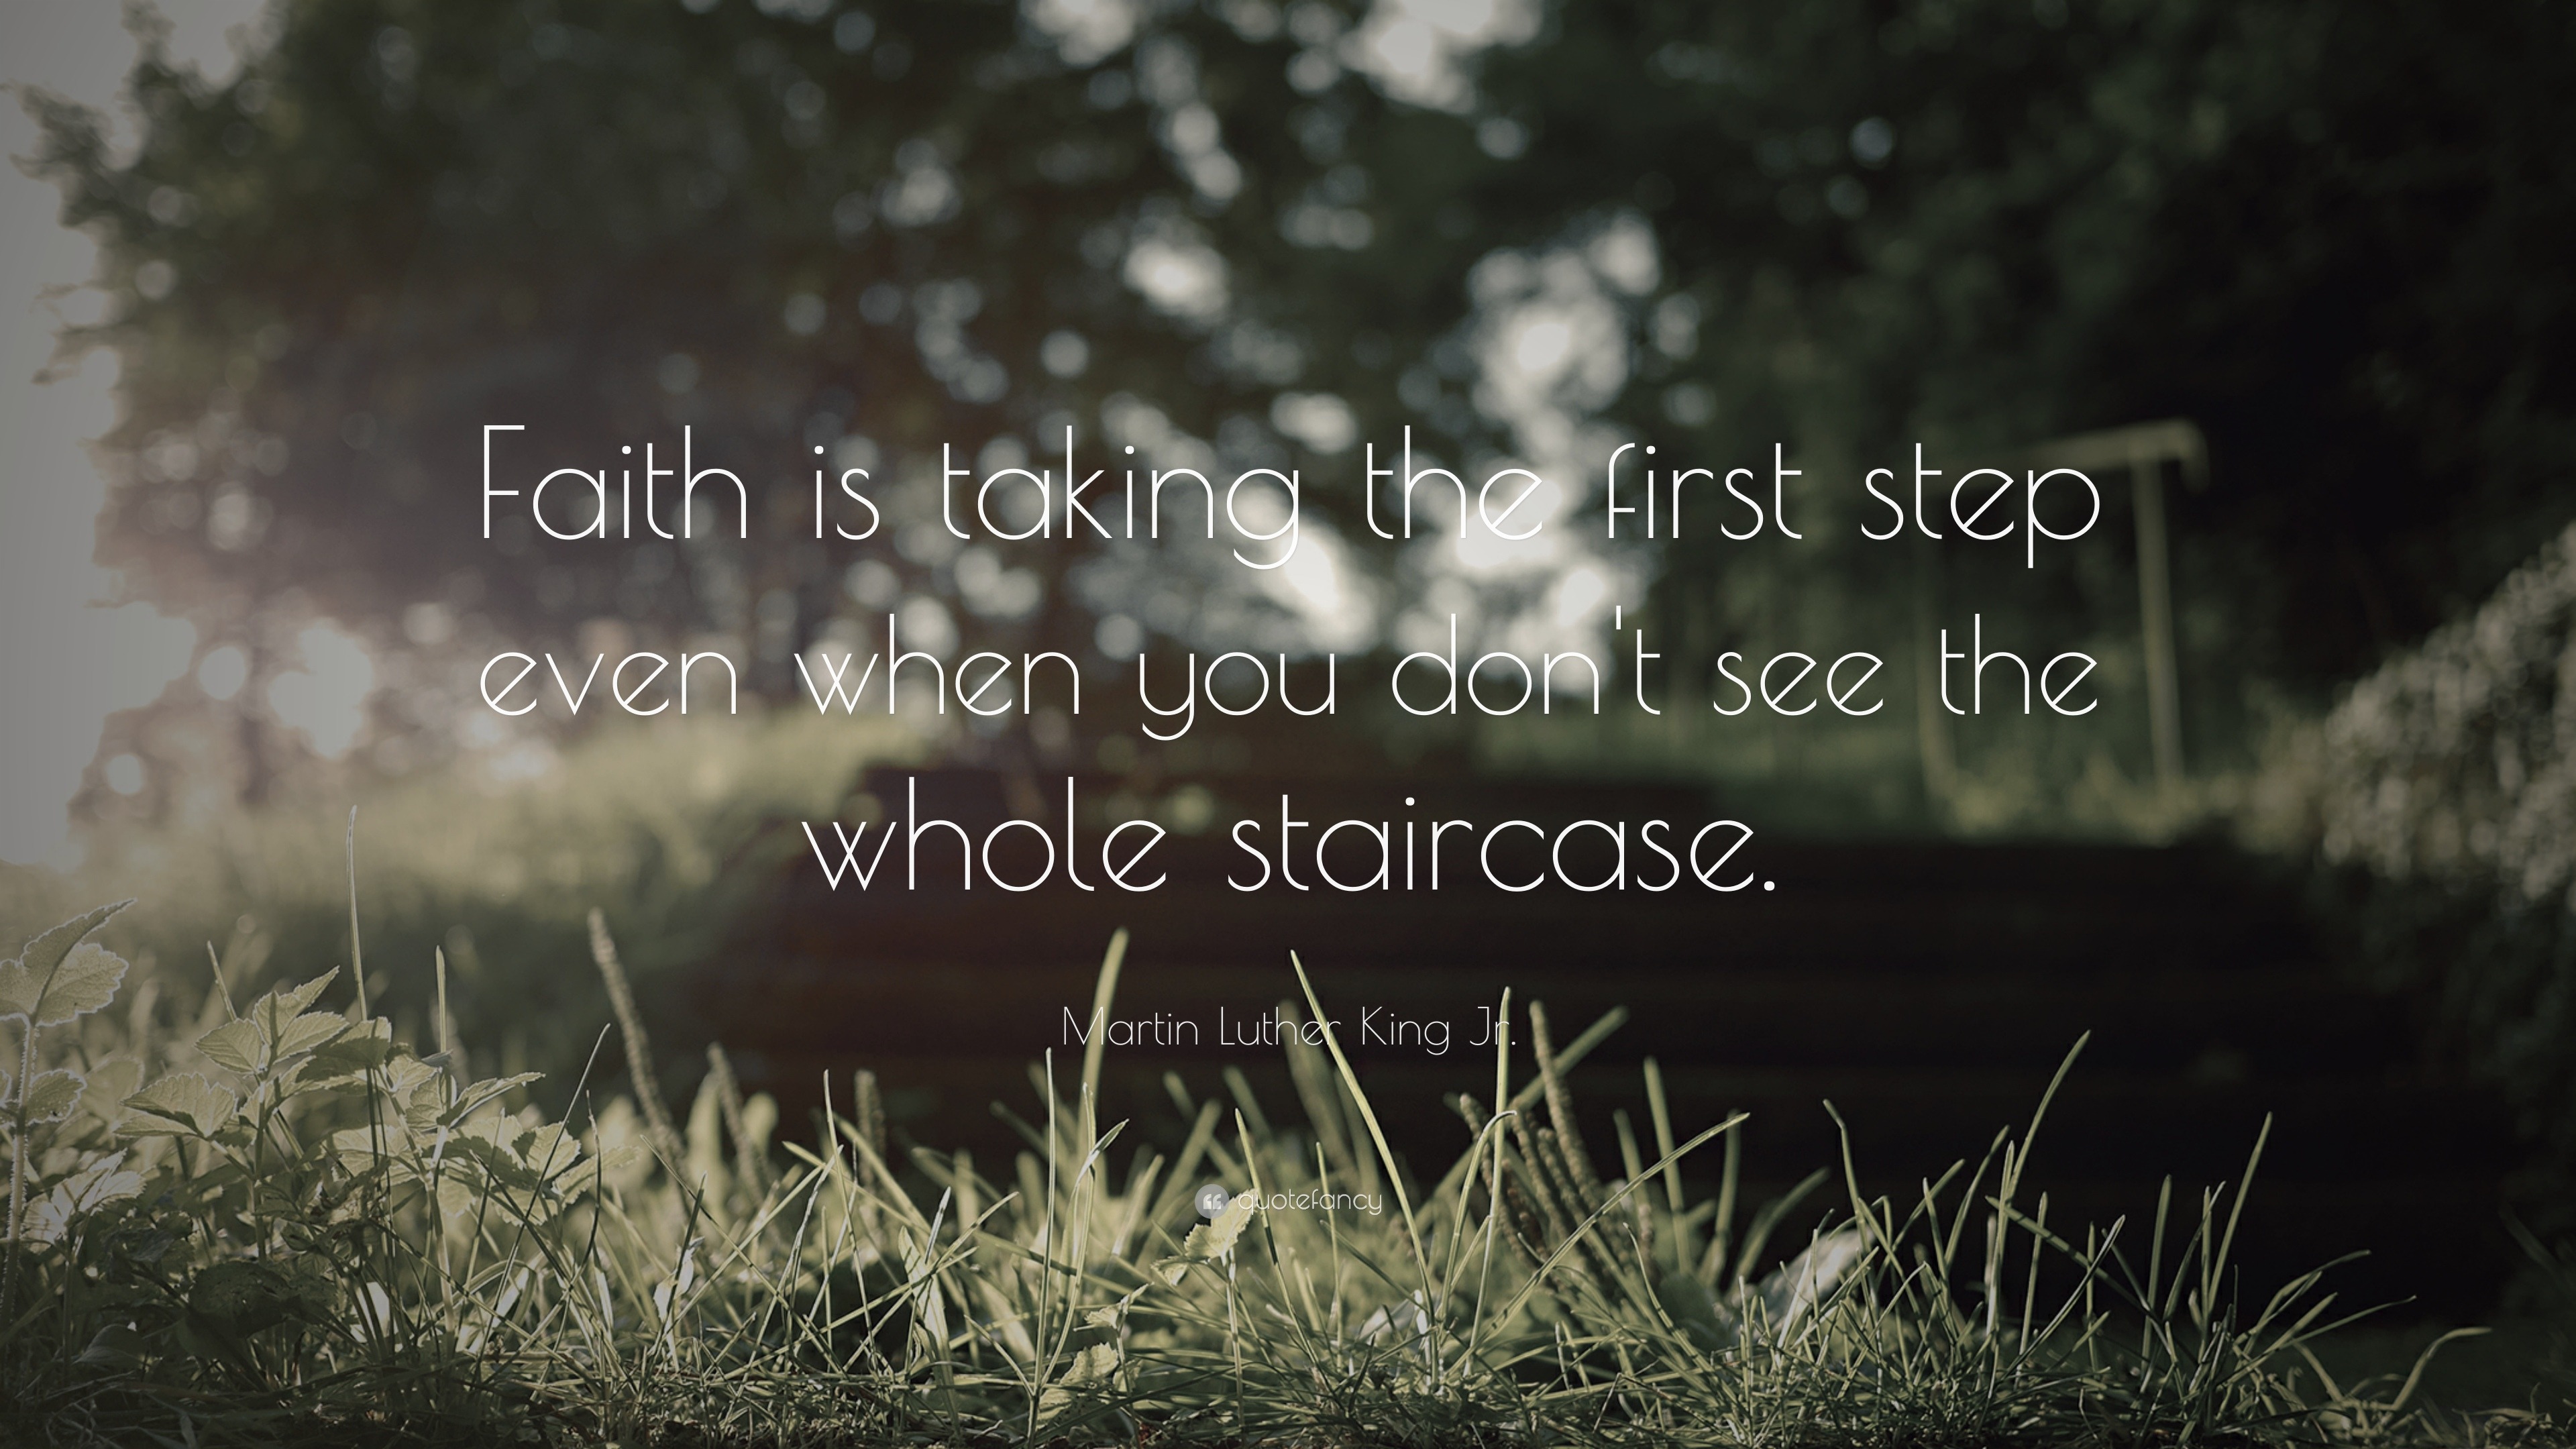 824 Martin Luther King Jr Quote Faith is taking the first step even